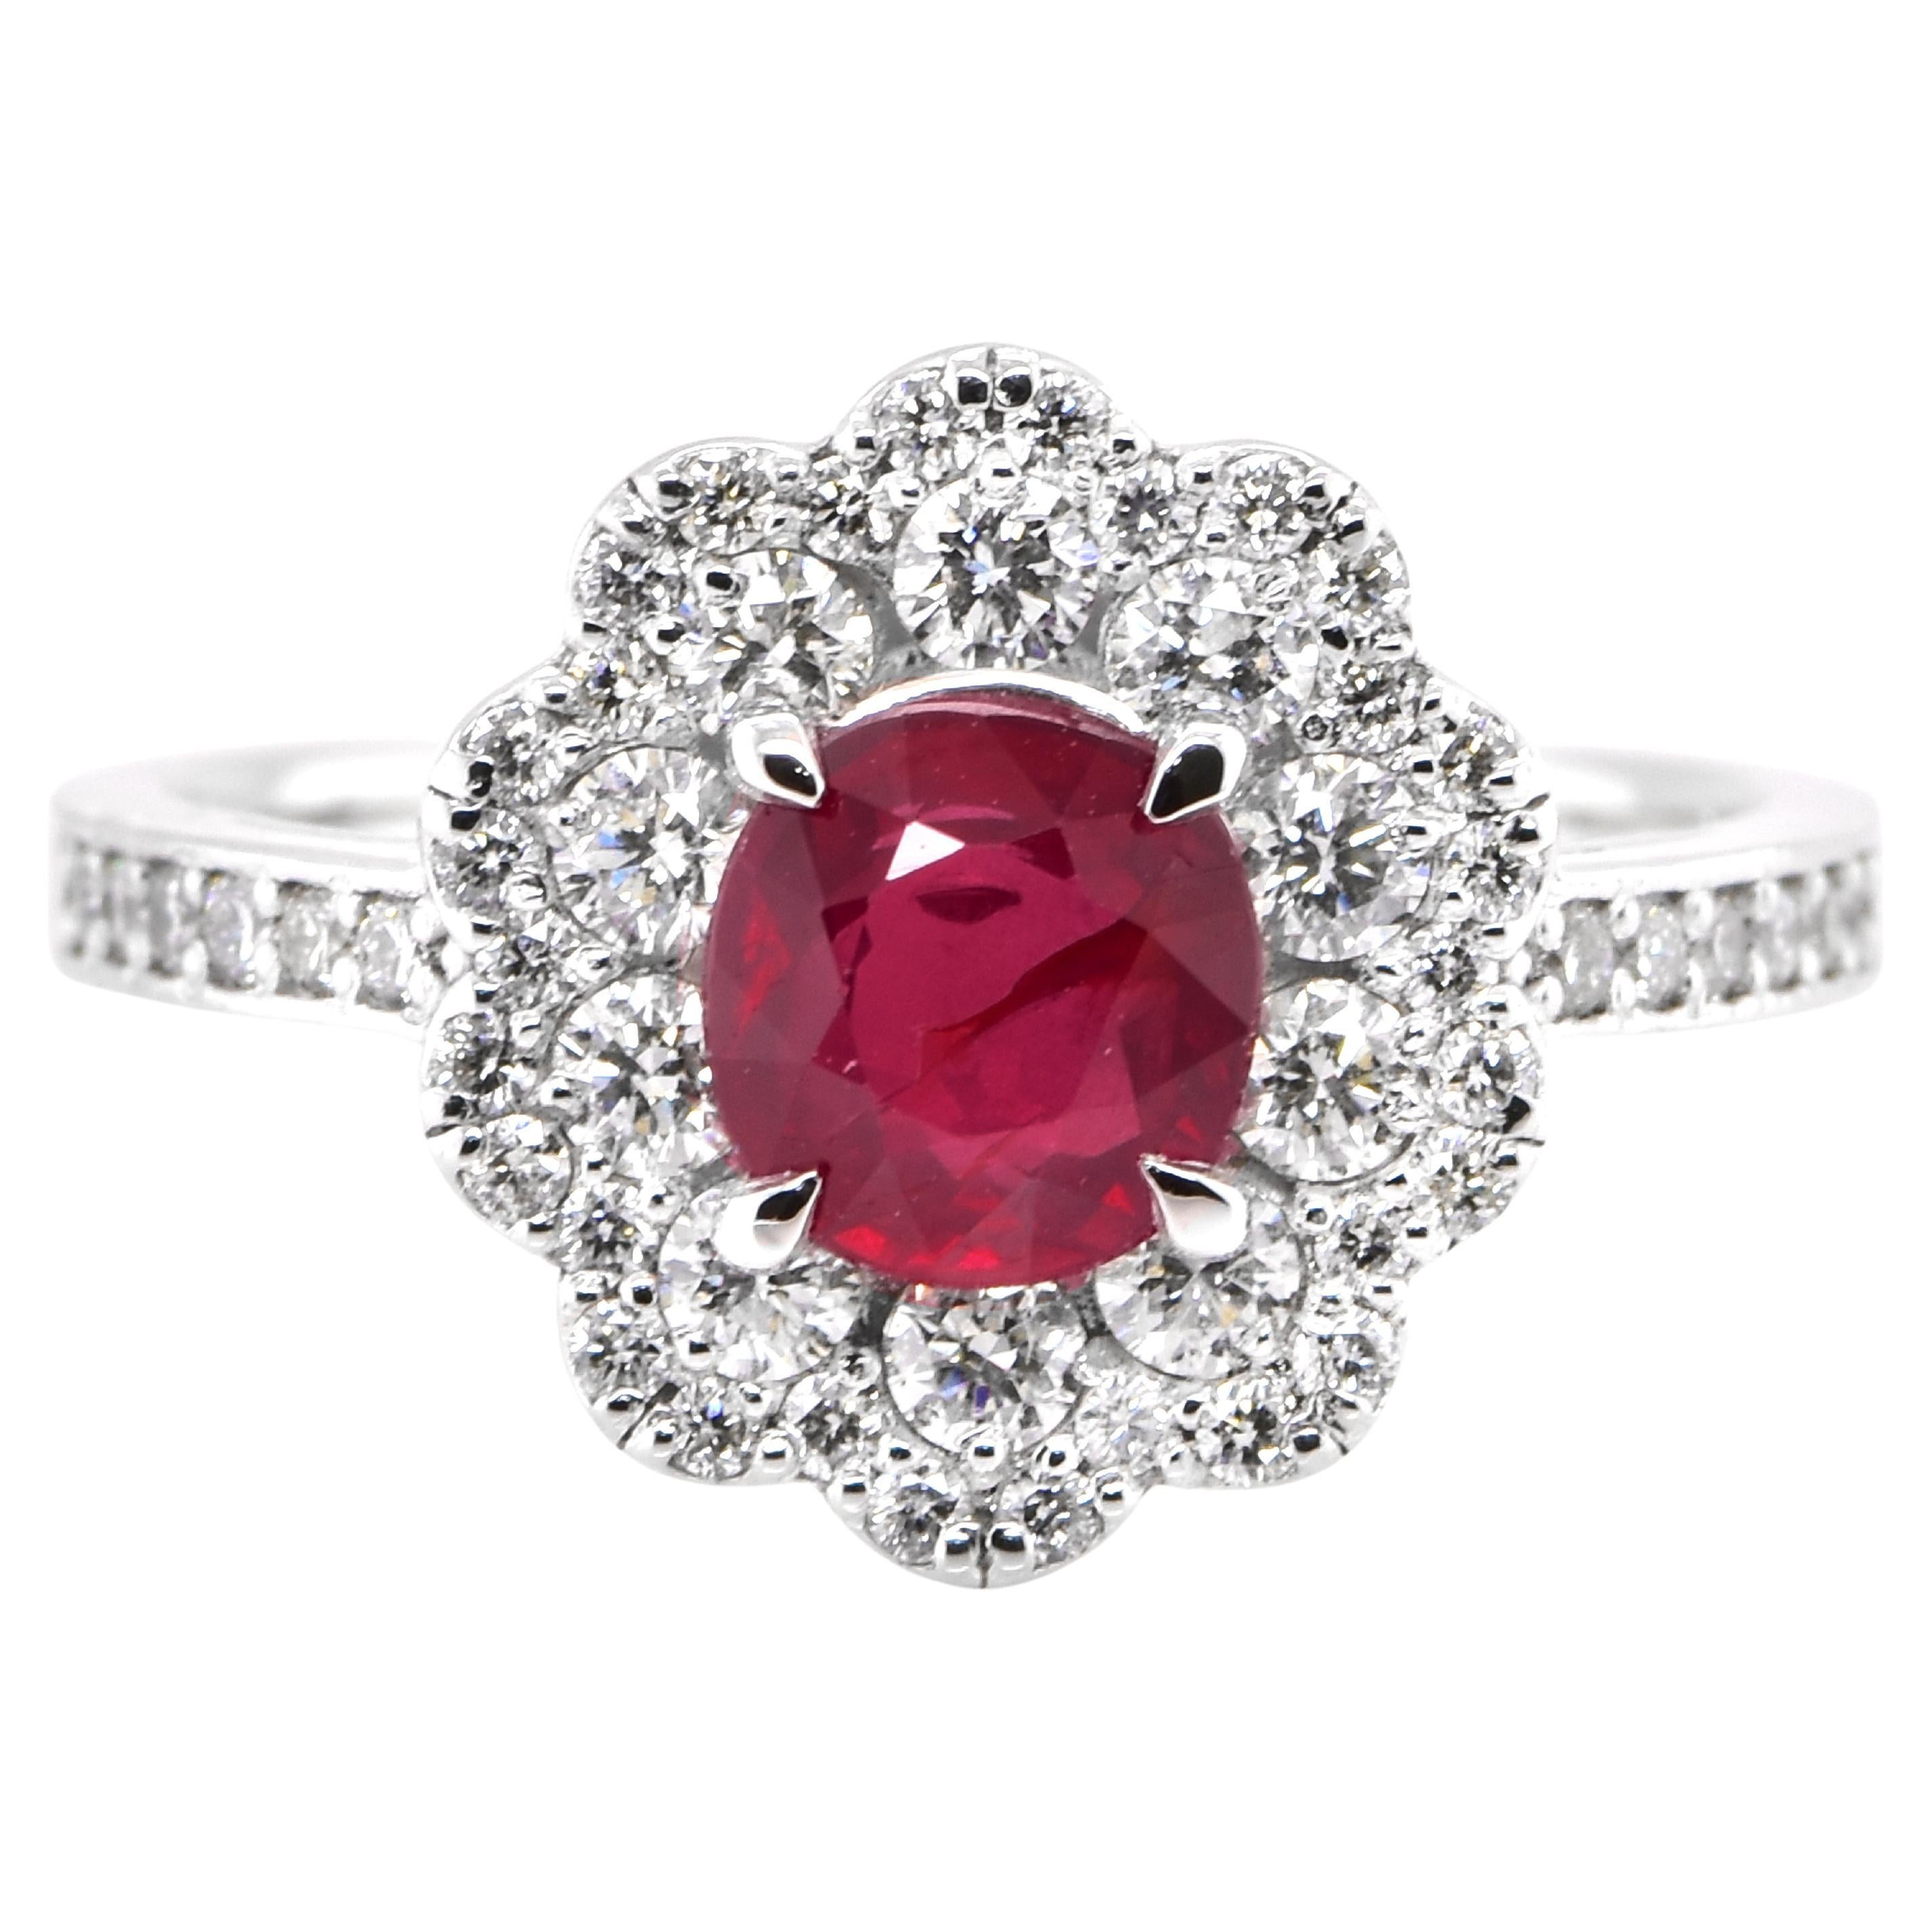 GIA Certified 1.14 Carat Natural, Unheated Ruby and Diamond Ring set in Platinum